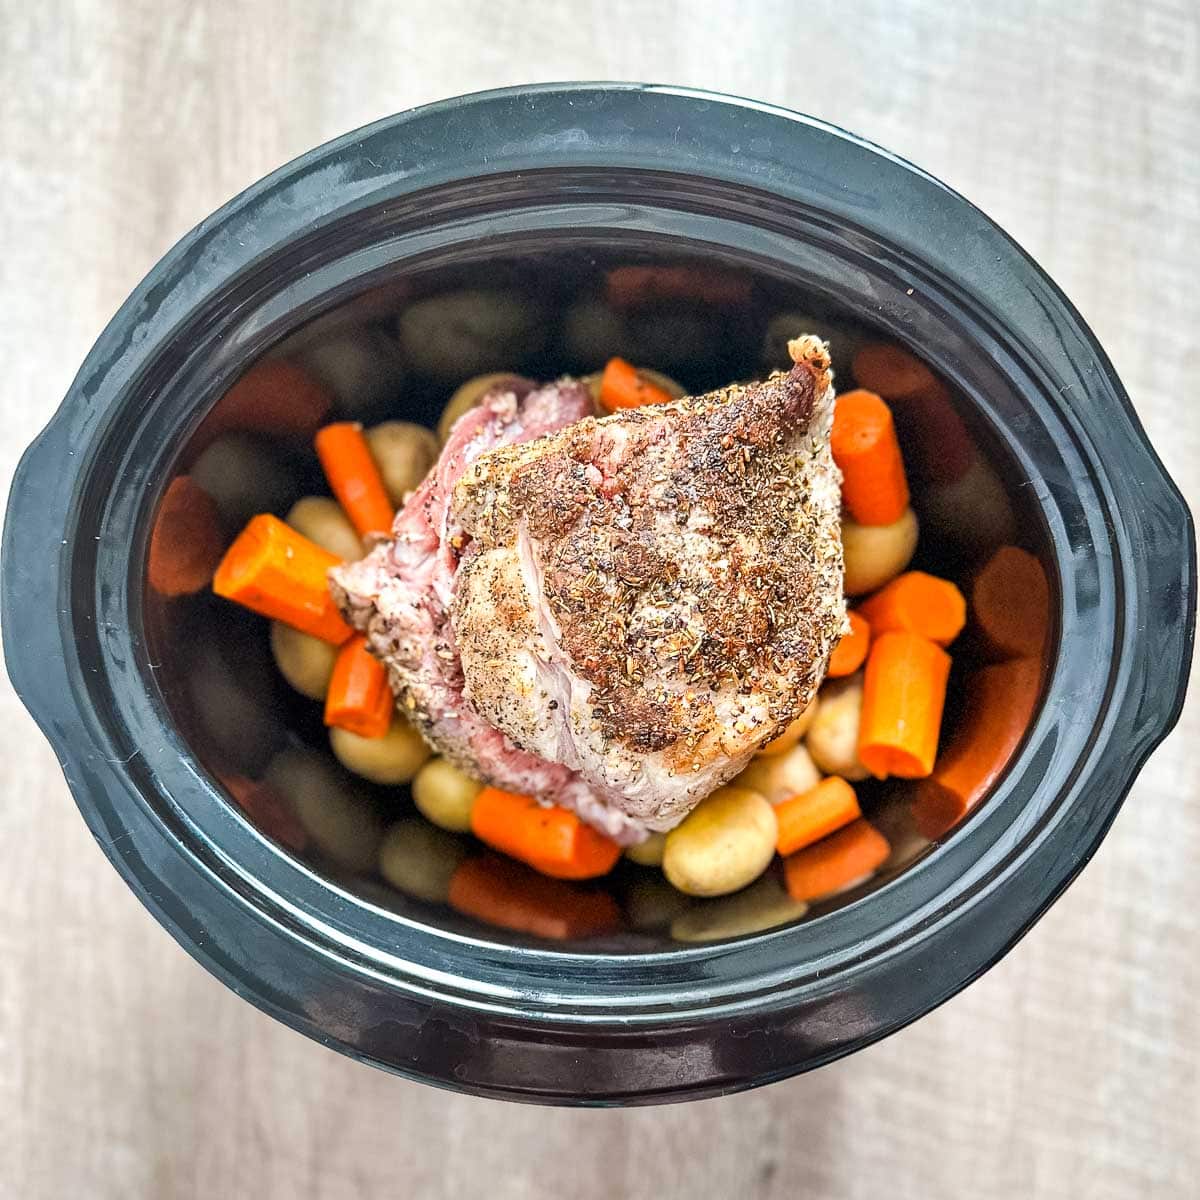 A crock pot filled with pork roast, potatoes, and carrots.